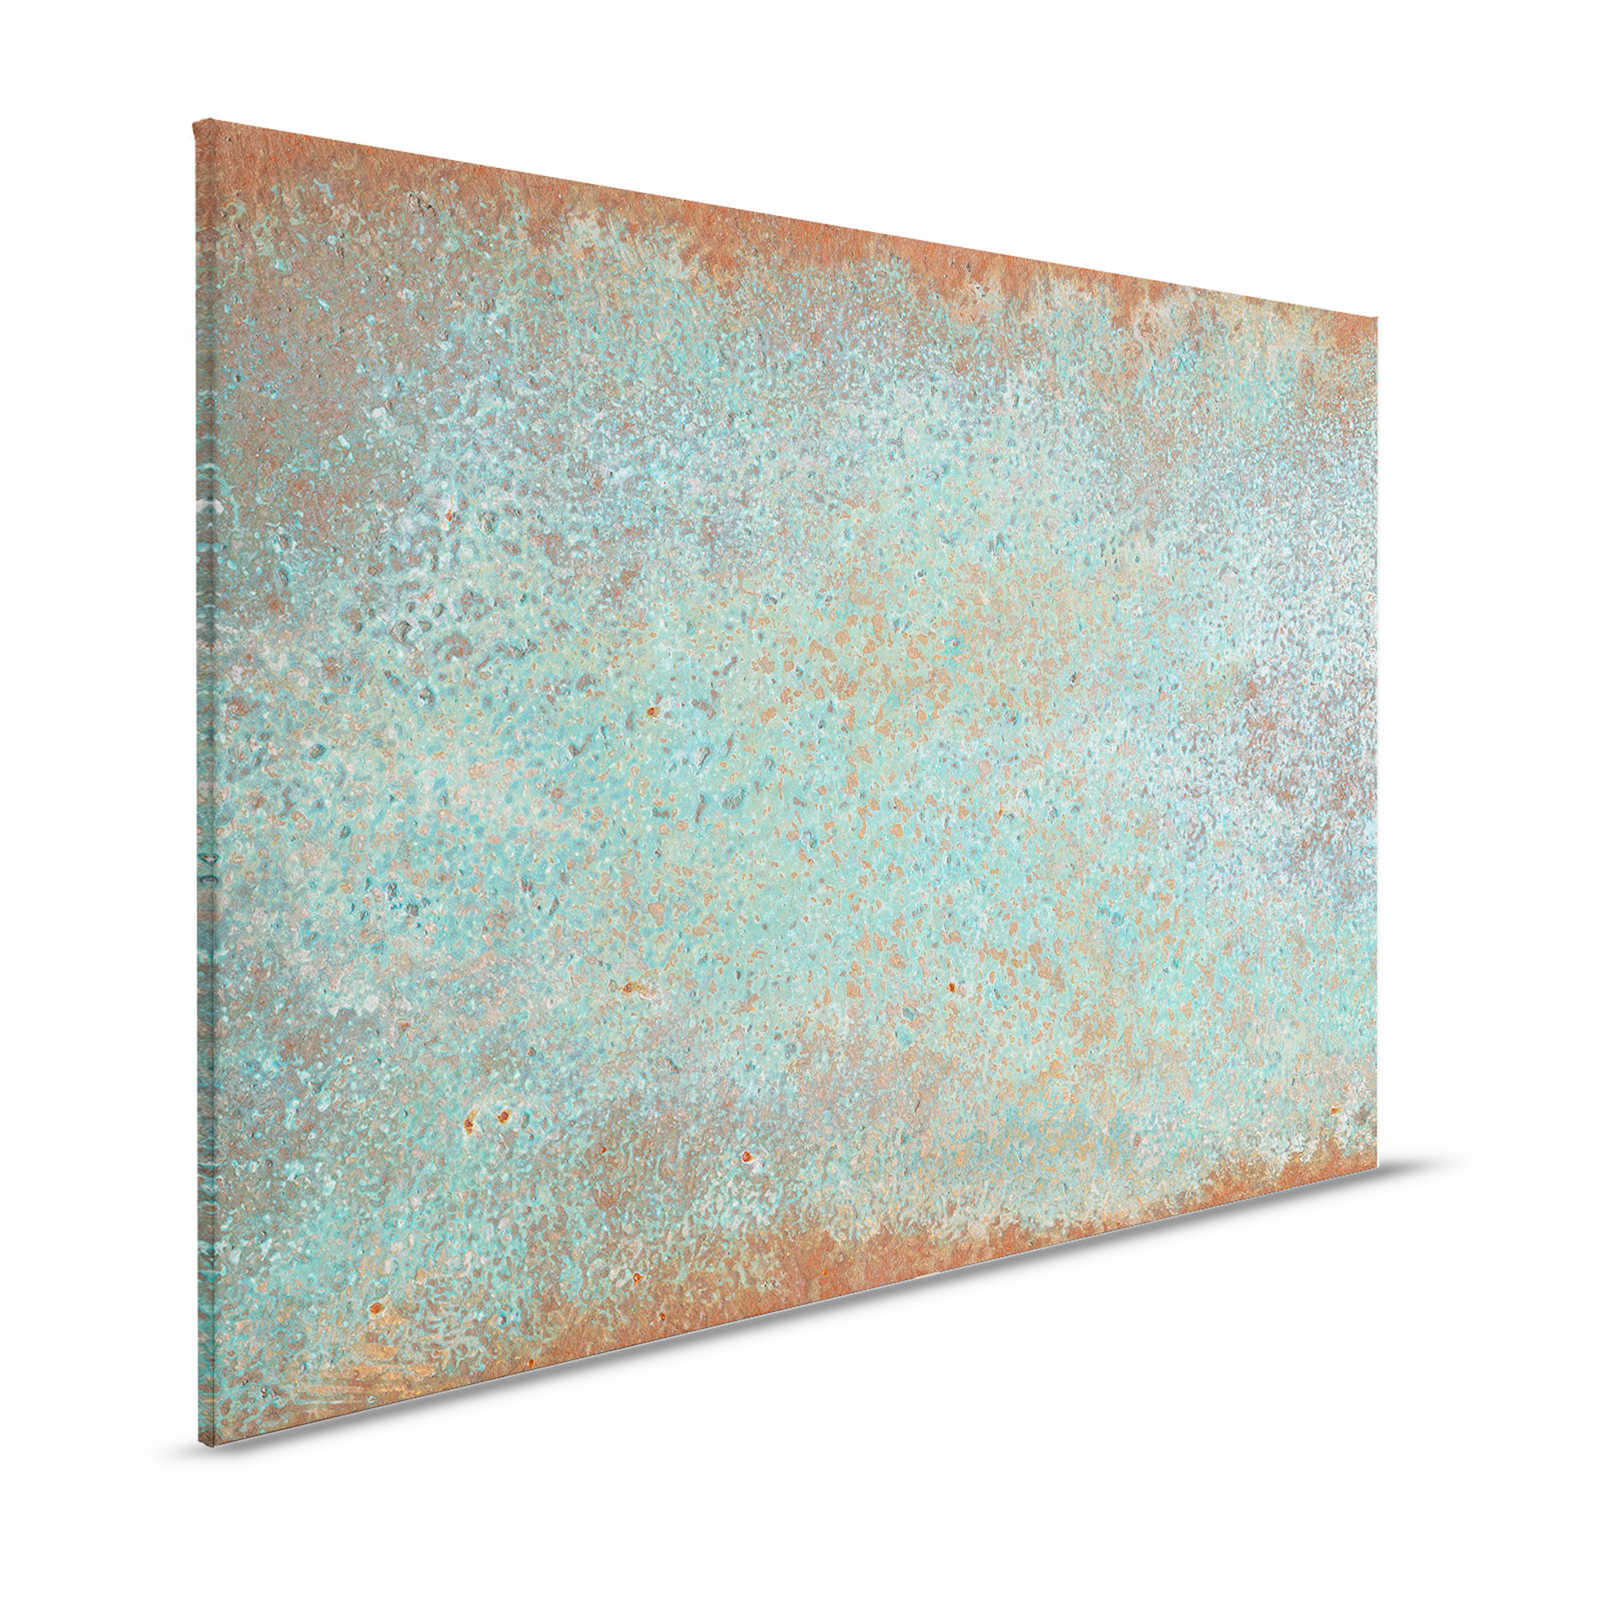 Metal Optics Canvas Painting Turquoise Patina with Rust - 1.20 m x 0.80 m
